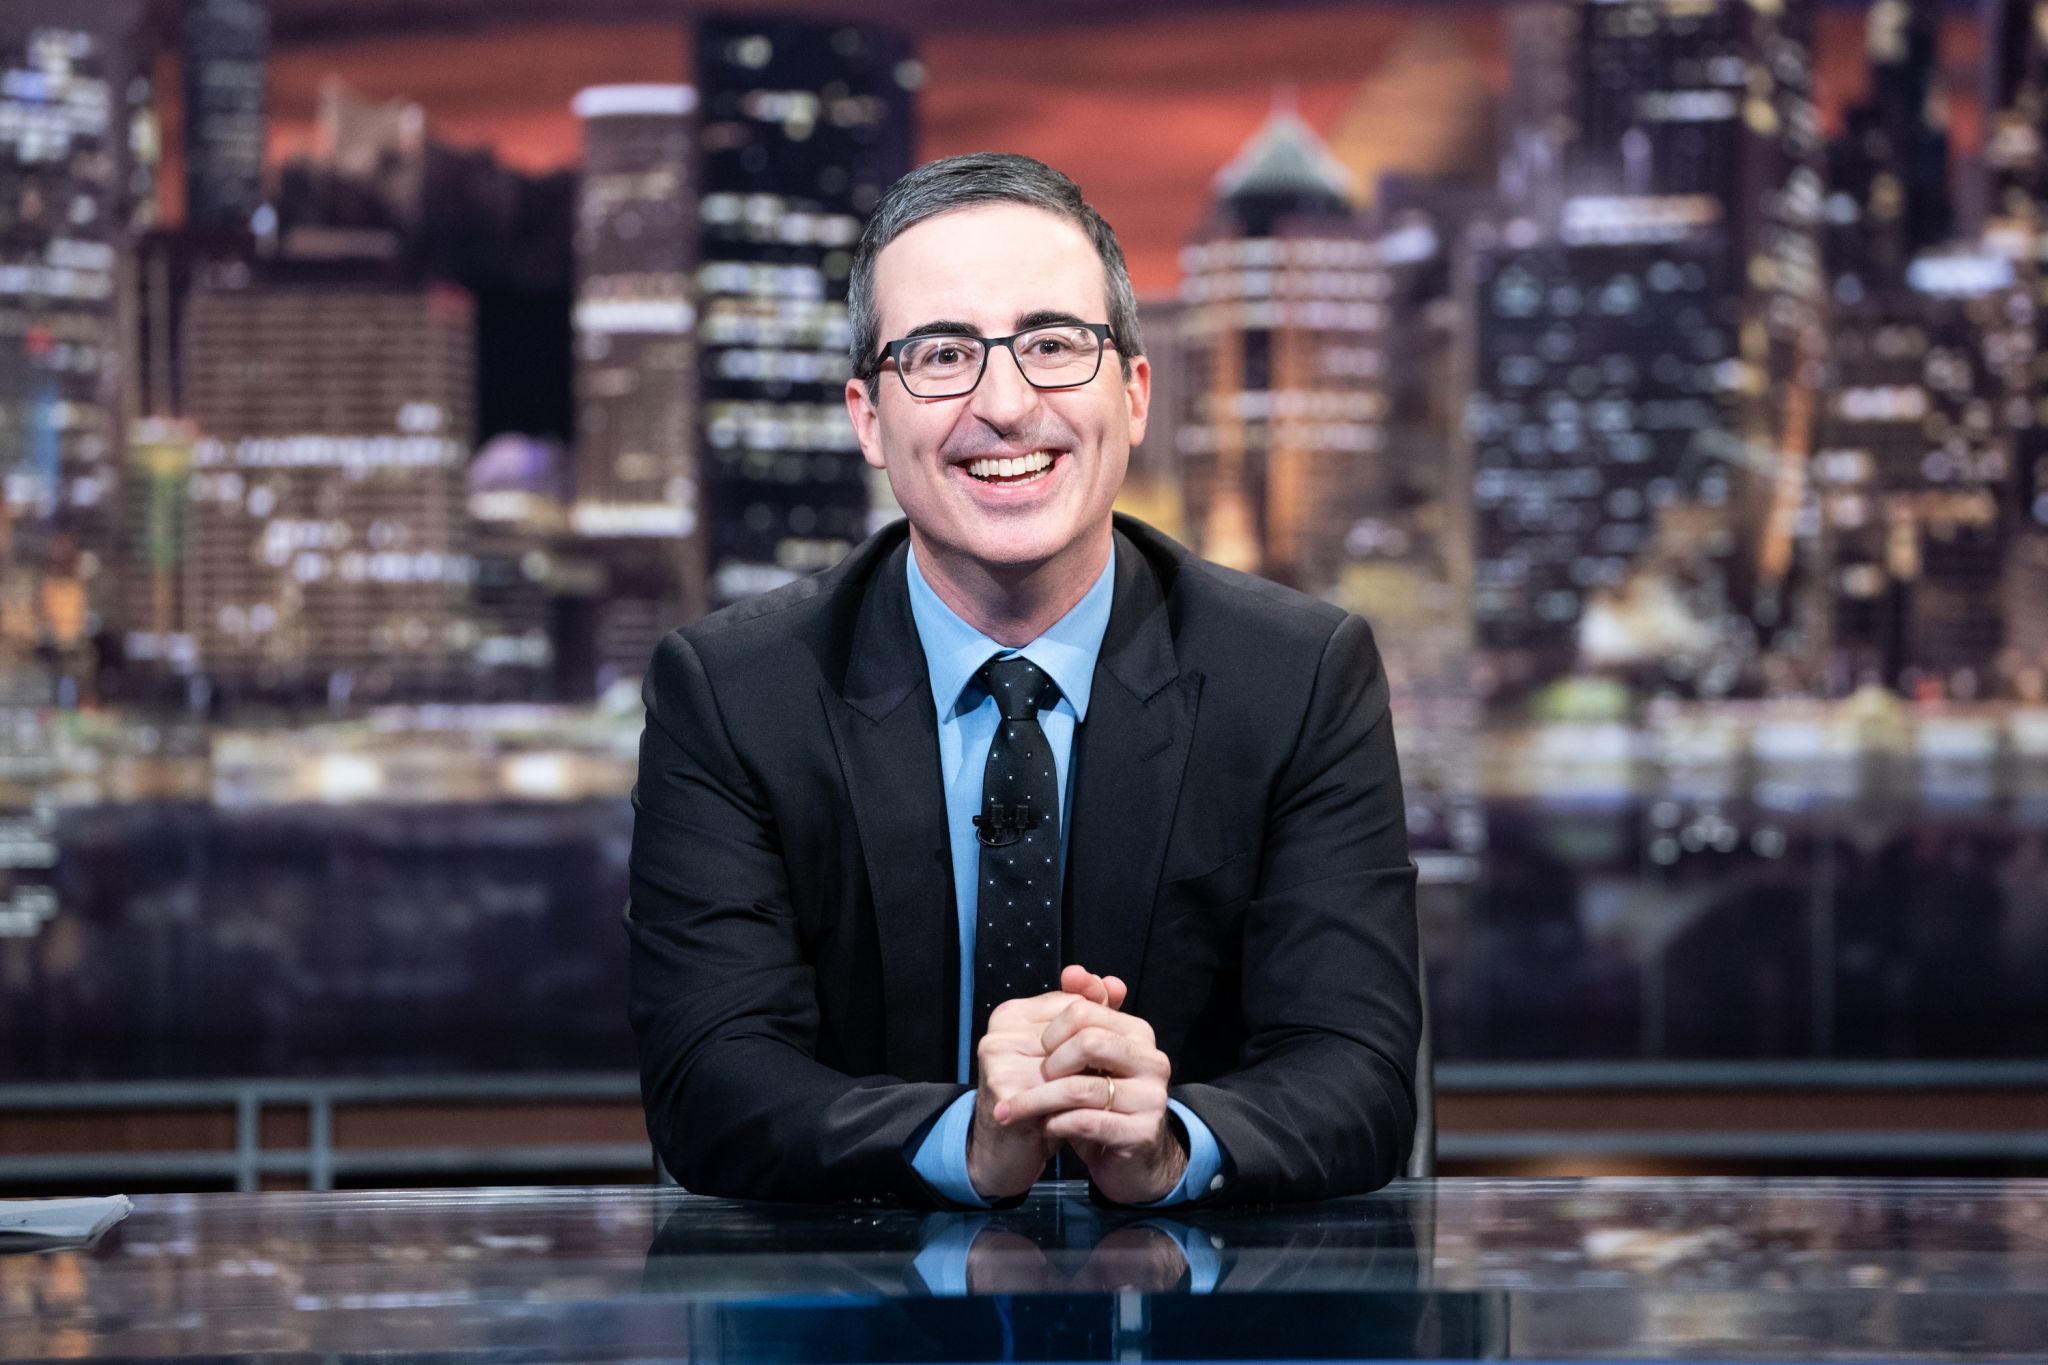 #39 Last Week Tonight #39 host John Oliver announces New Year #39 s sets in San